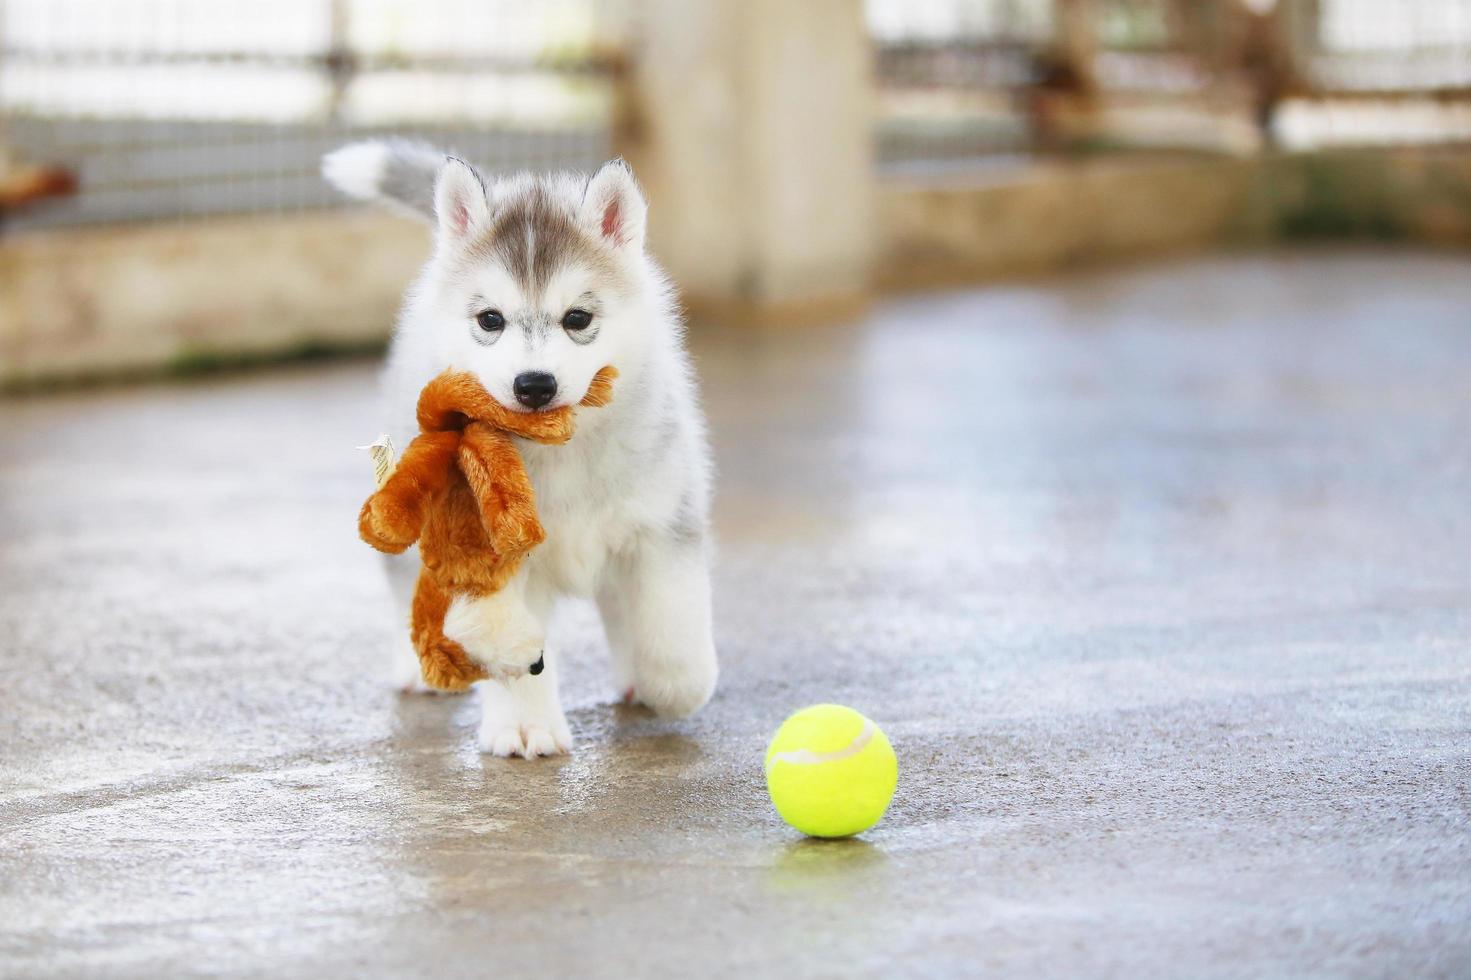 Siberian husky puppy playing with doll and tennis ball. Fluffy puppy with toy in mouth. photo